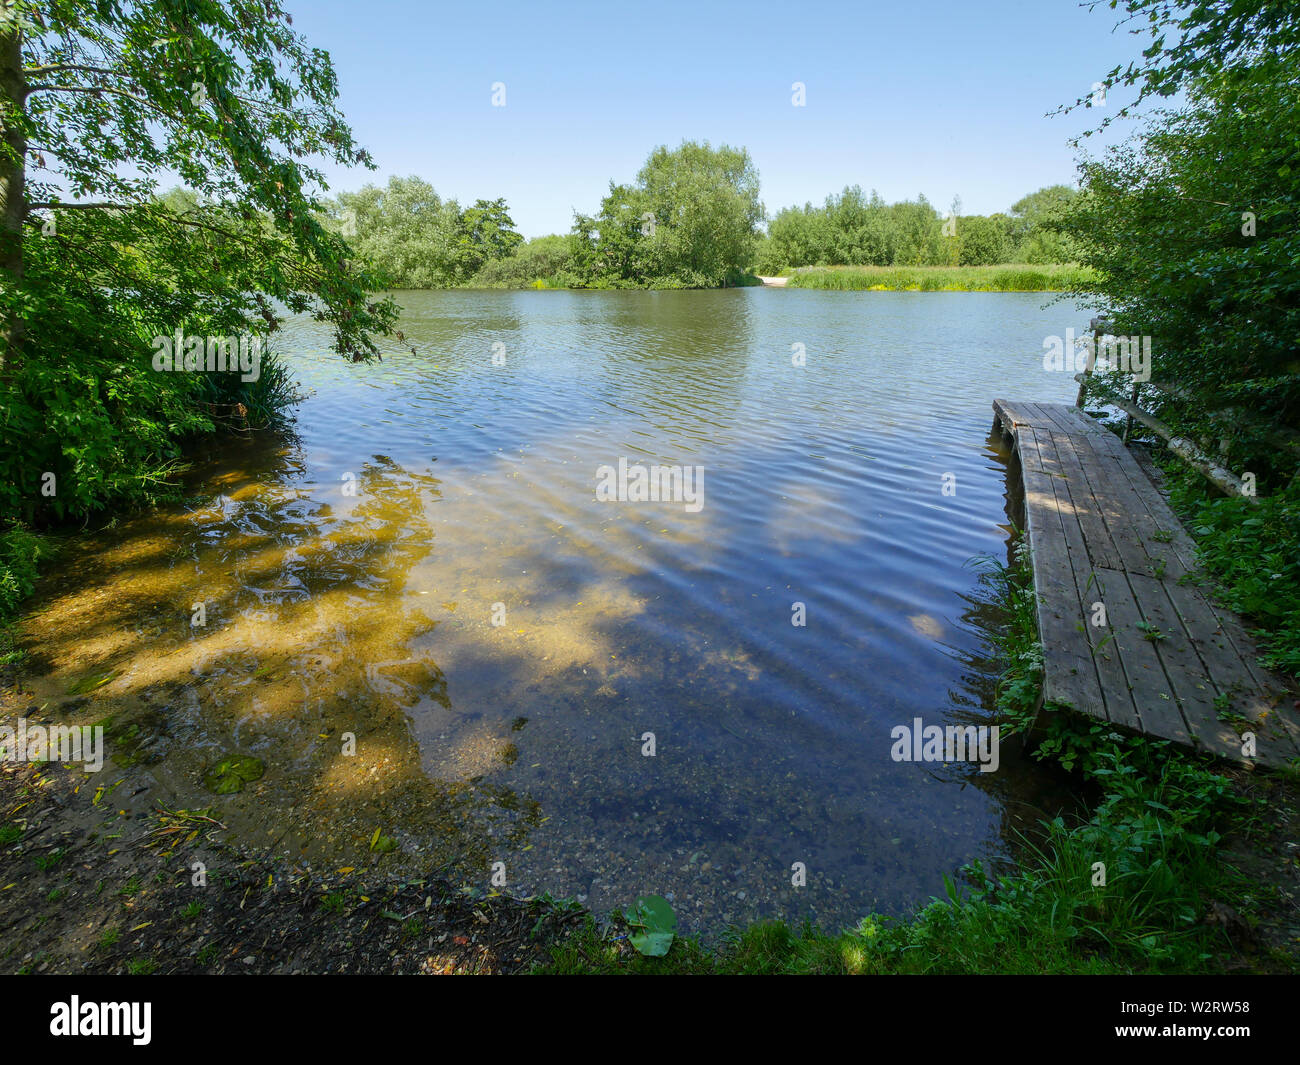 Old Little Stoke, Ferry Port, for Crossing River Thames now Disused, on Ridgeway Path, Littlestoke, Oxfordshire, England, UK, GB. Stock Photo